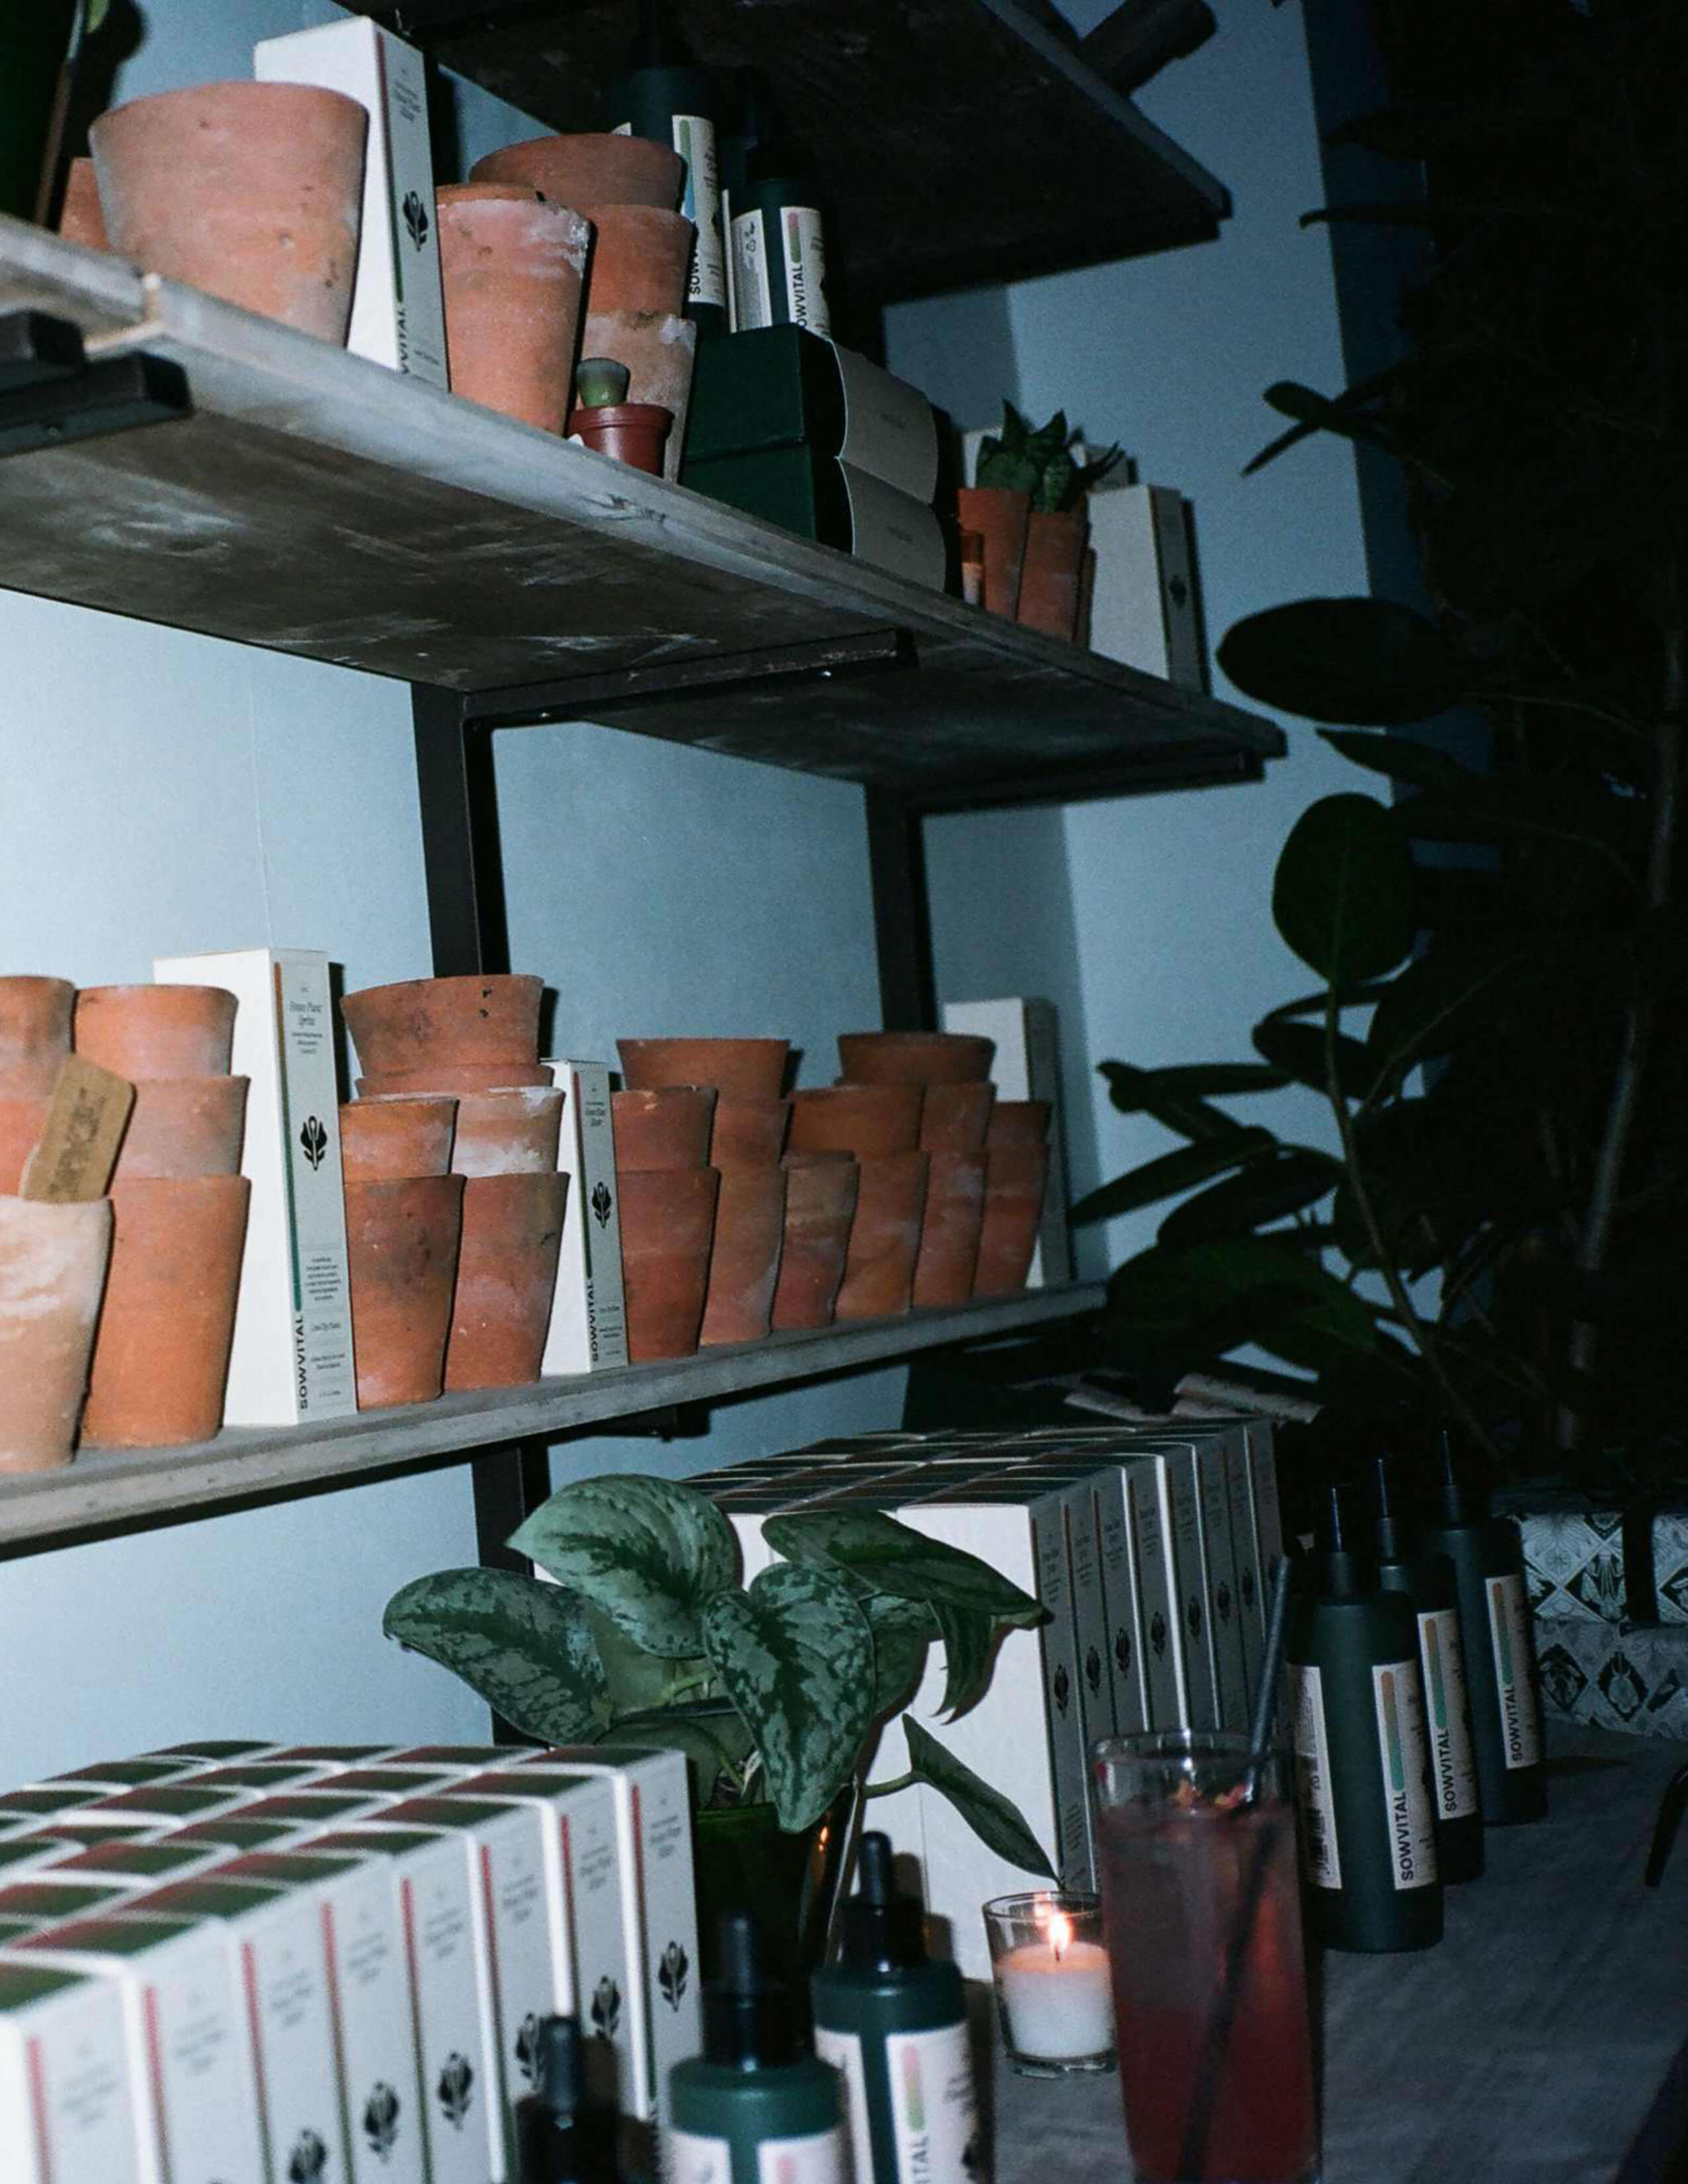 A photograph of a shelf of Sowvital house plant products in a dark mode.